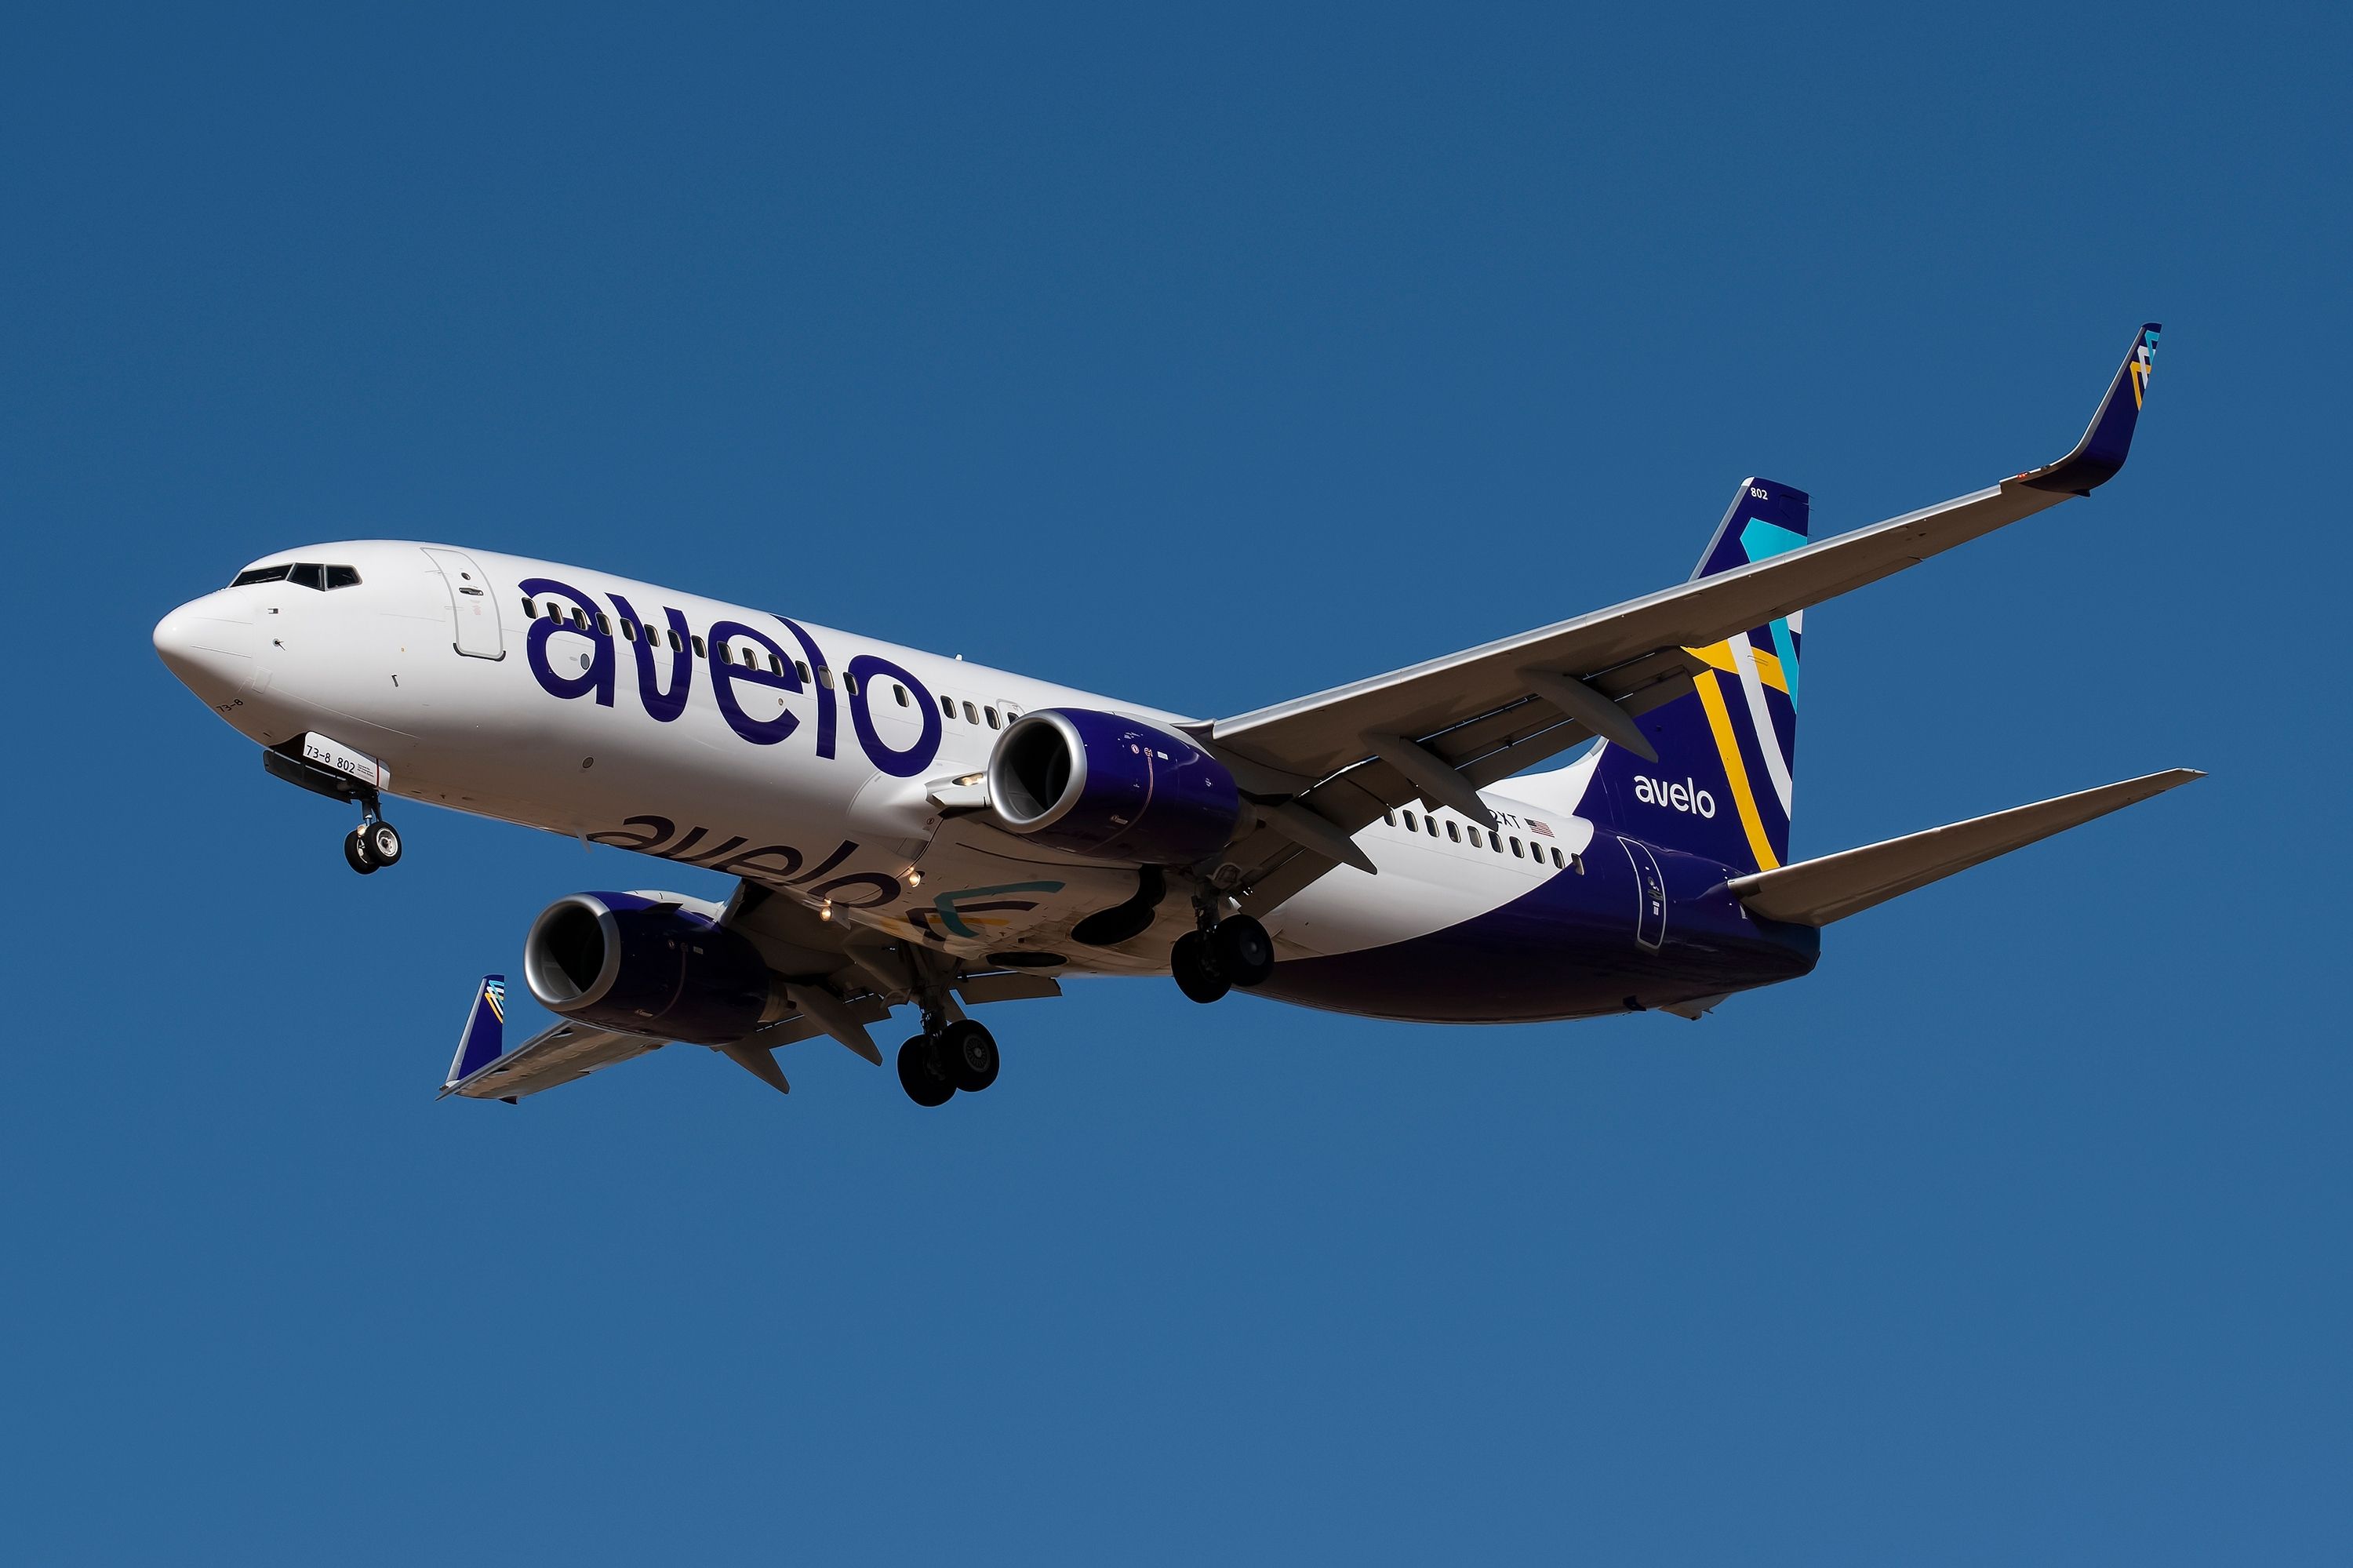 AZ Avelo Airlines Boeing 737-800 N802XT on short final to 12R at Williams Gateway Airport in Mesa, AZ